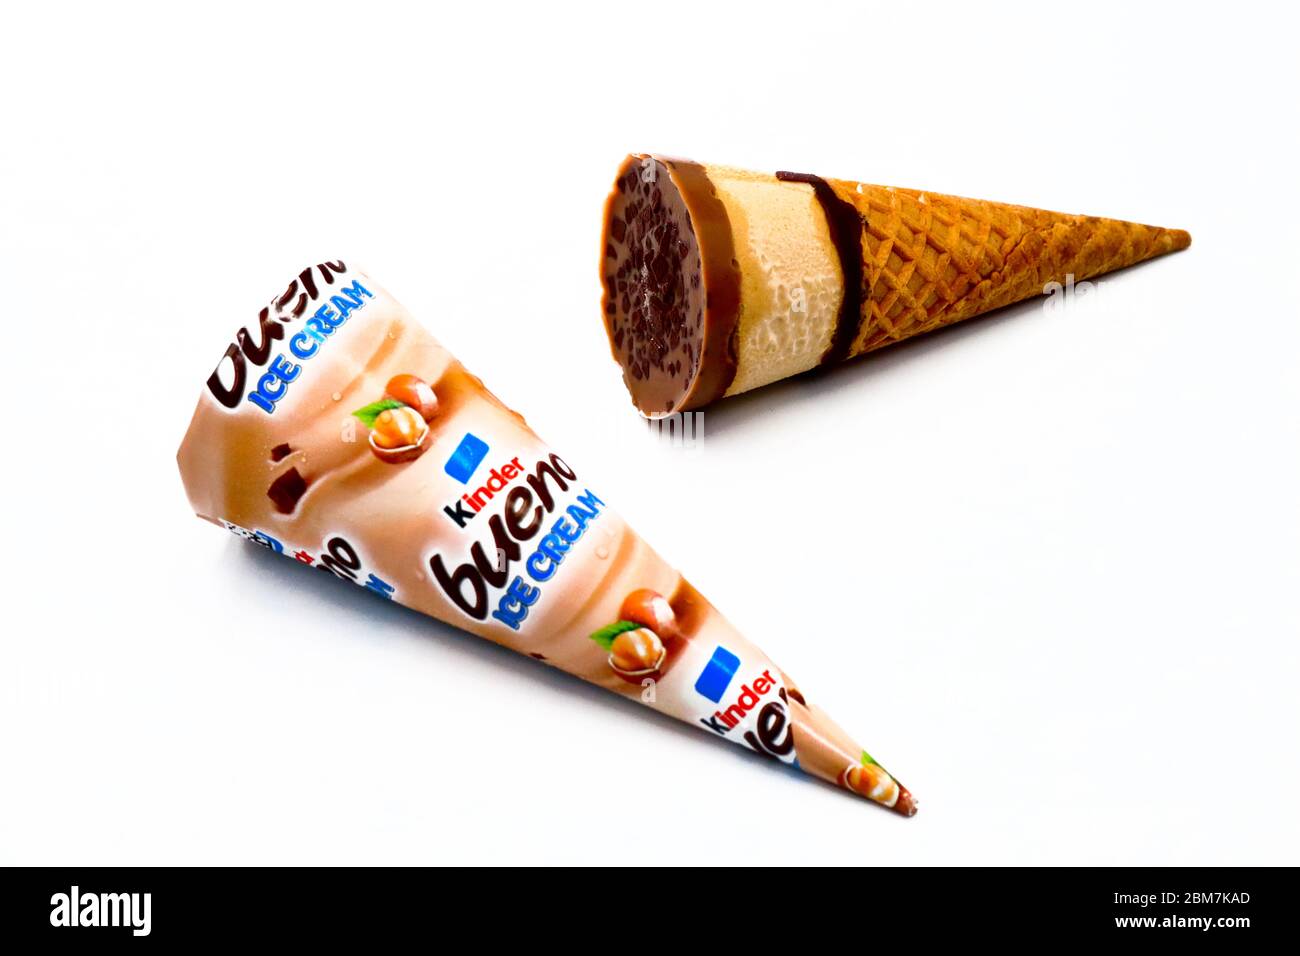 Kinder Bueno Ice Cream. Kinder is a brand of food products of The Kinder Ice Cream is a collaboration between Ferrero and Unilever Stock Photo - Alamy